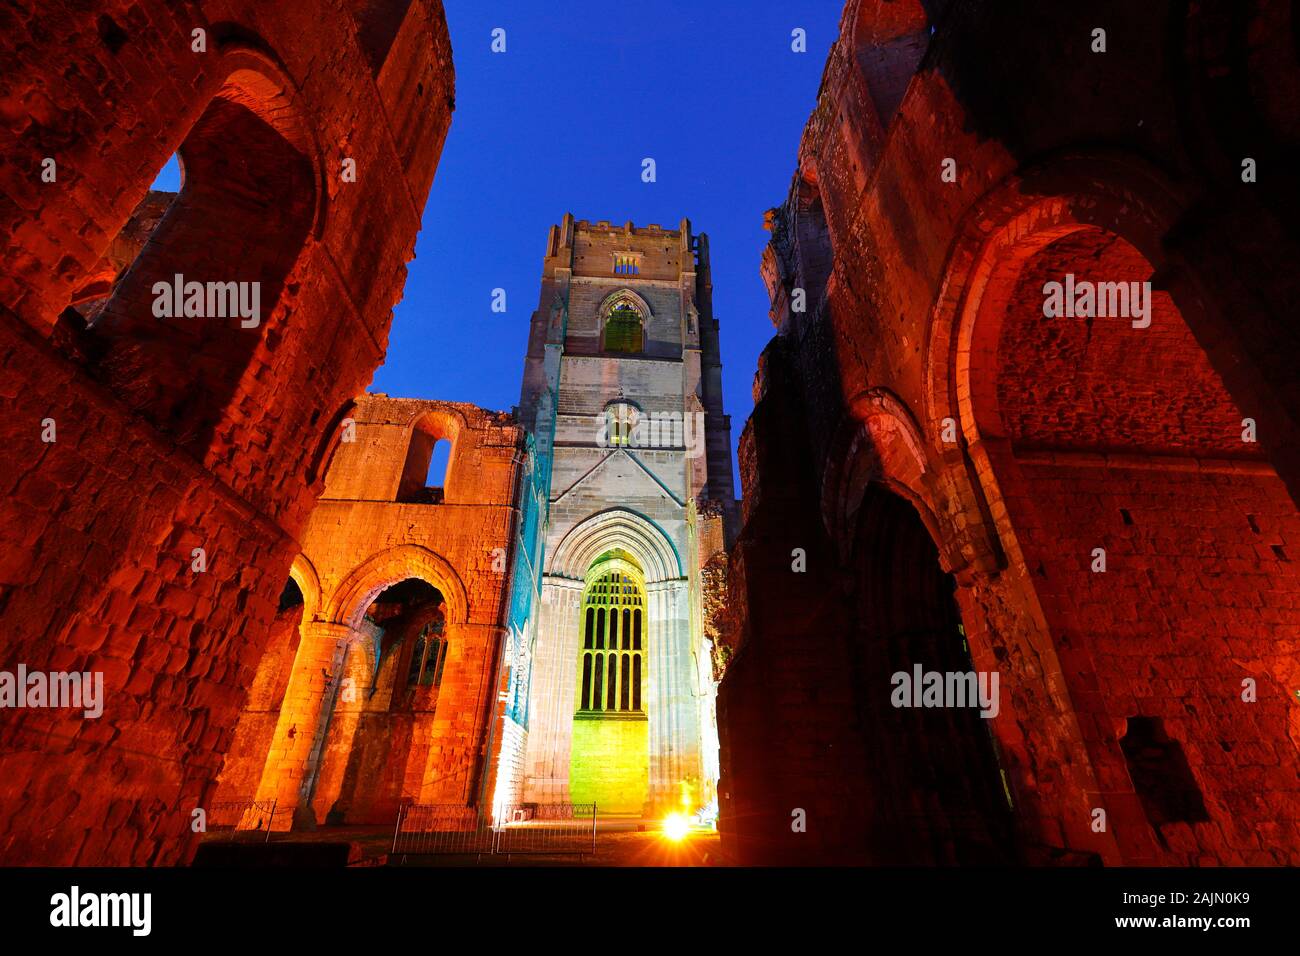 Fountains Abbey Tower at night, during Christmas coloured illuminations Stock Photo